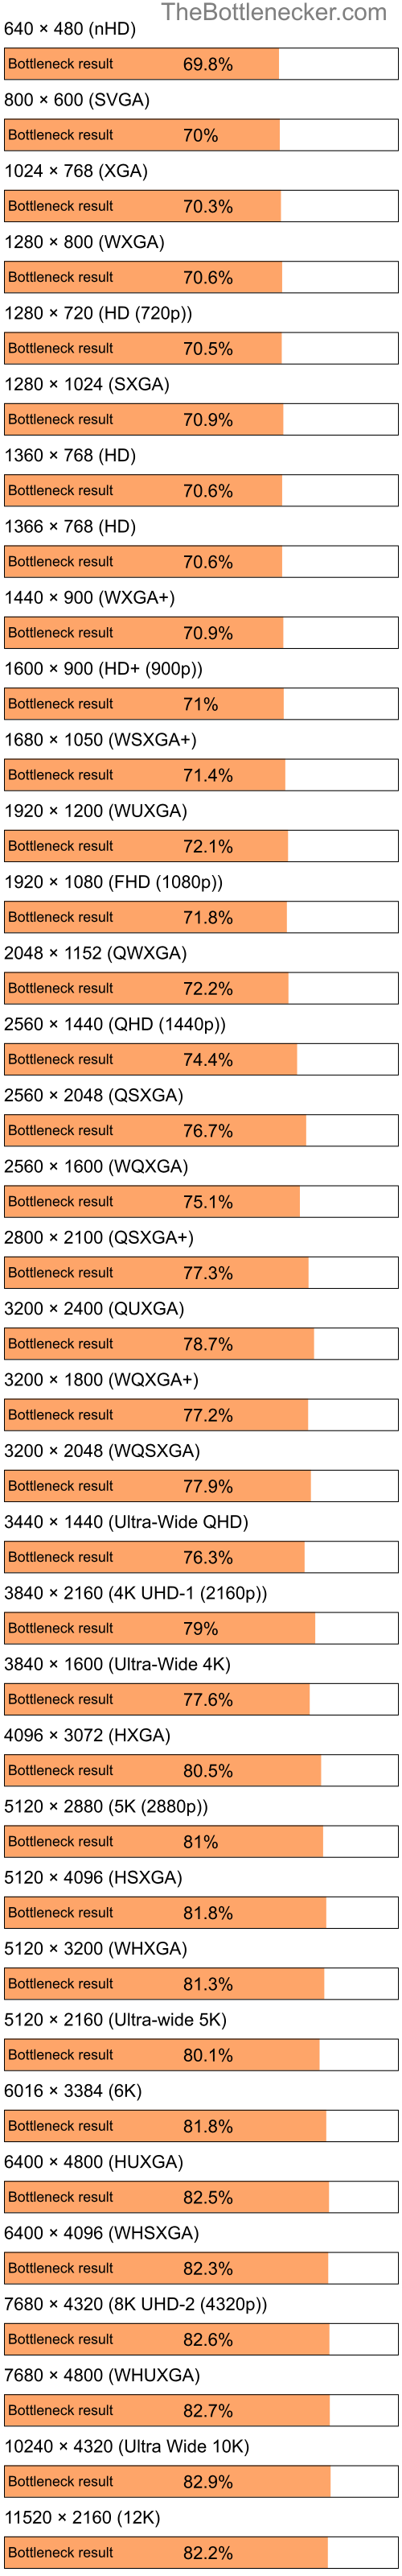 Bottleneck results by resolution for Intel Celeron and NVIDIA GeForce 6610 XL in Graphic Card Intense Tasks